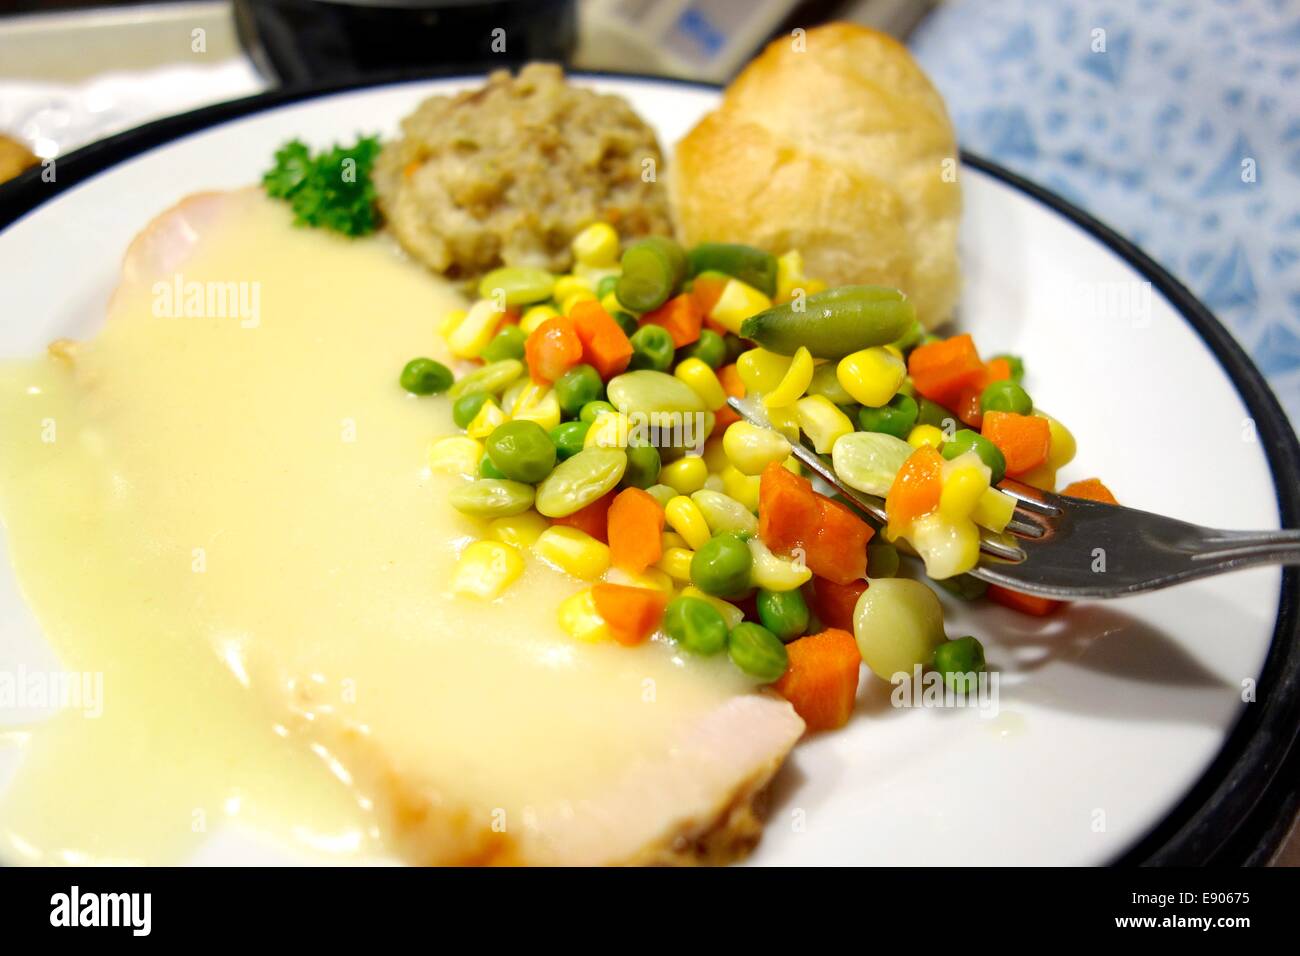 Hospital meal of turkey and stuffing with gravy, roll and corn, pea, carrot, bean medley. Stock Photo